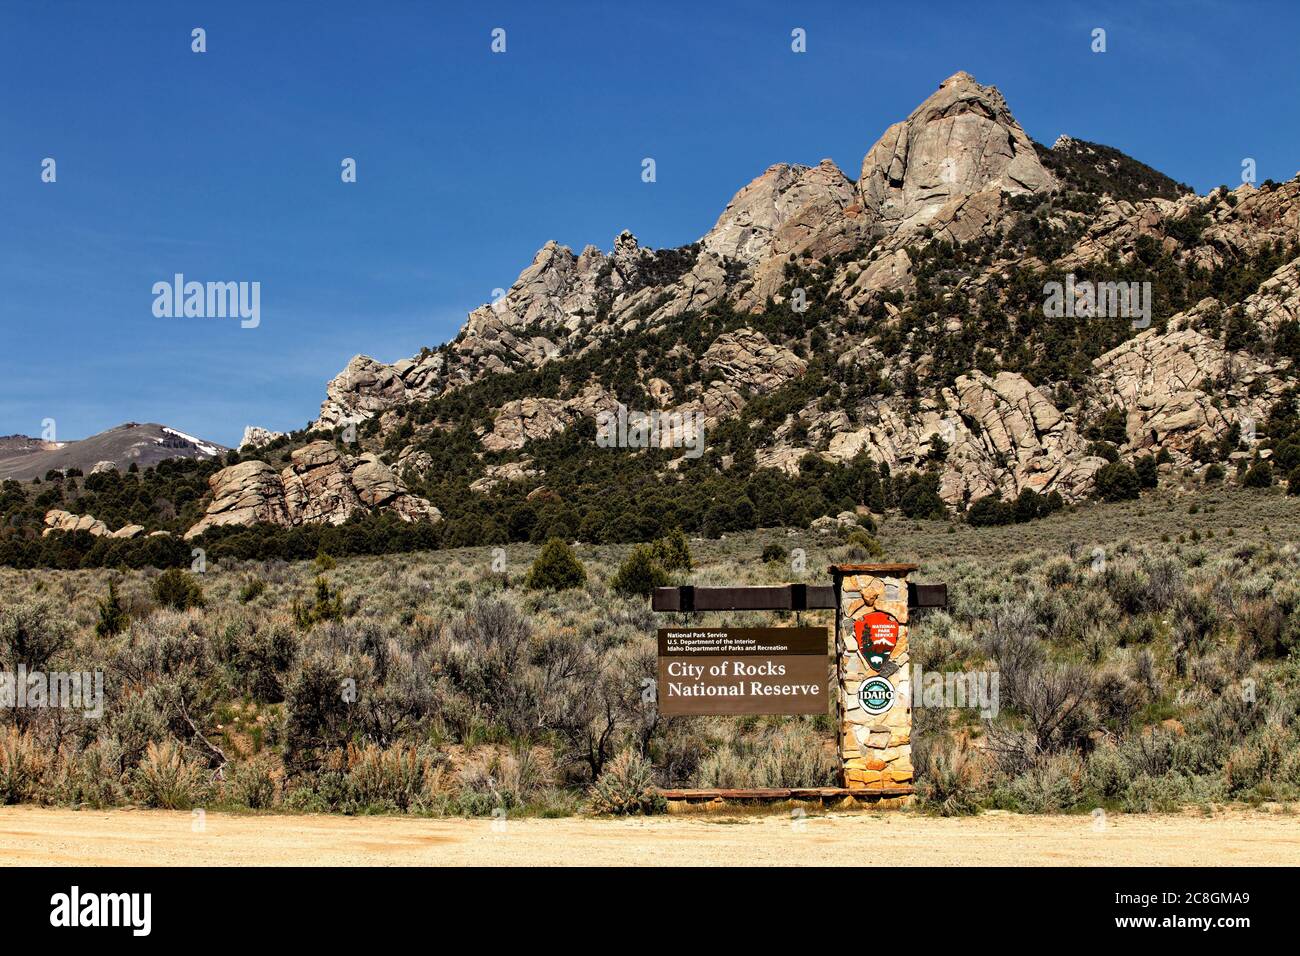 The front entrance sign and granite formations in the City of Rocks National Reserve near Oakley, Idaho. Stock Photo